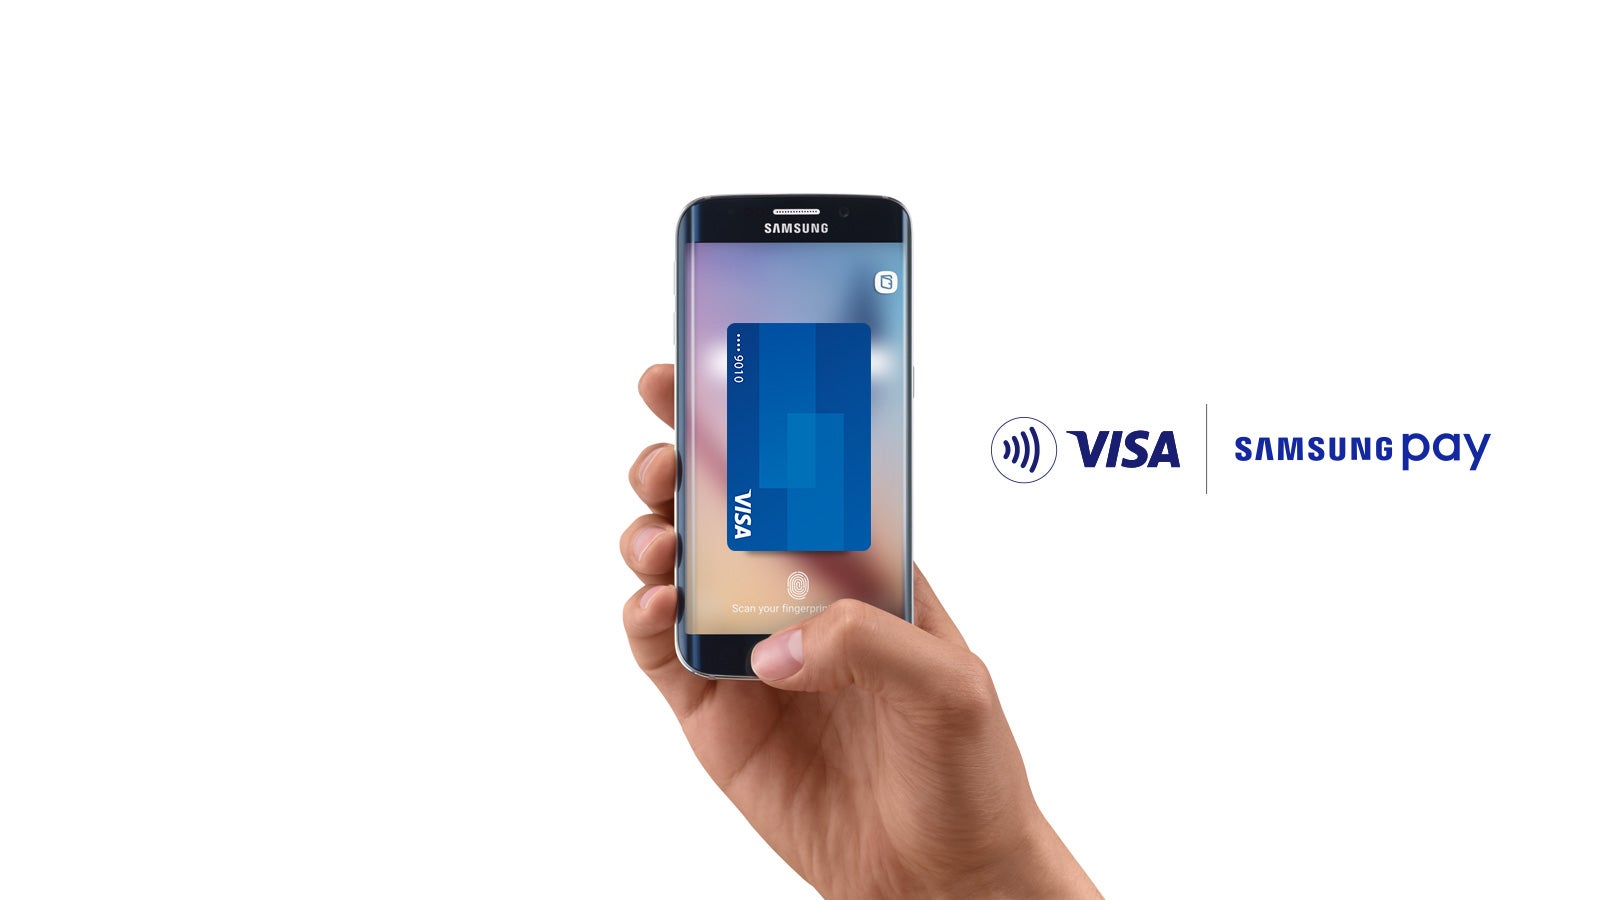 Malaysia now has access to a beta version of Samsung Pay